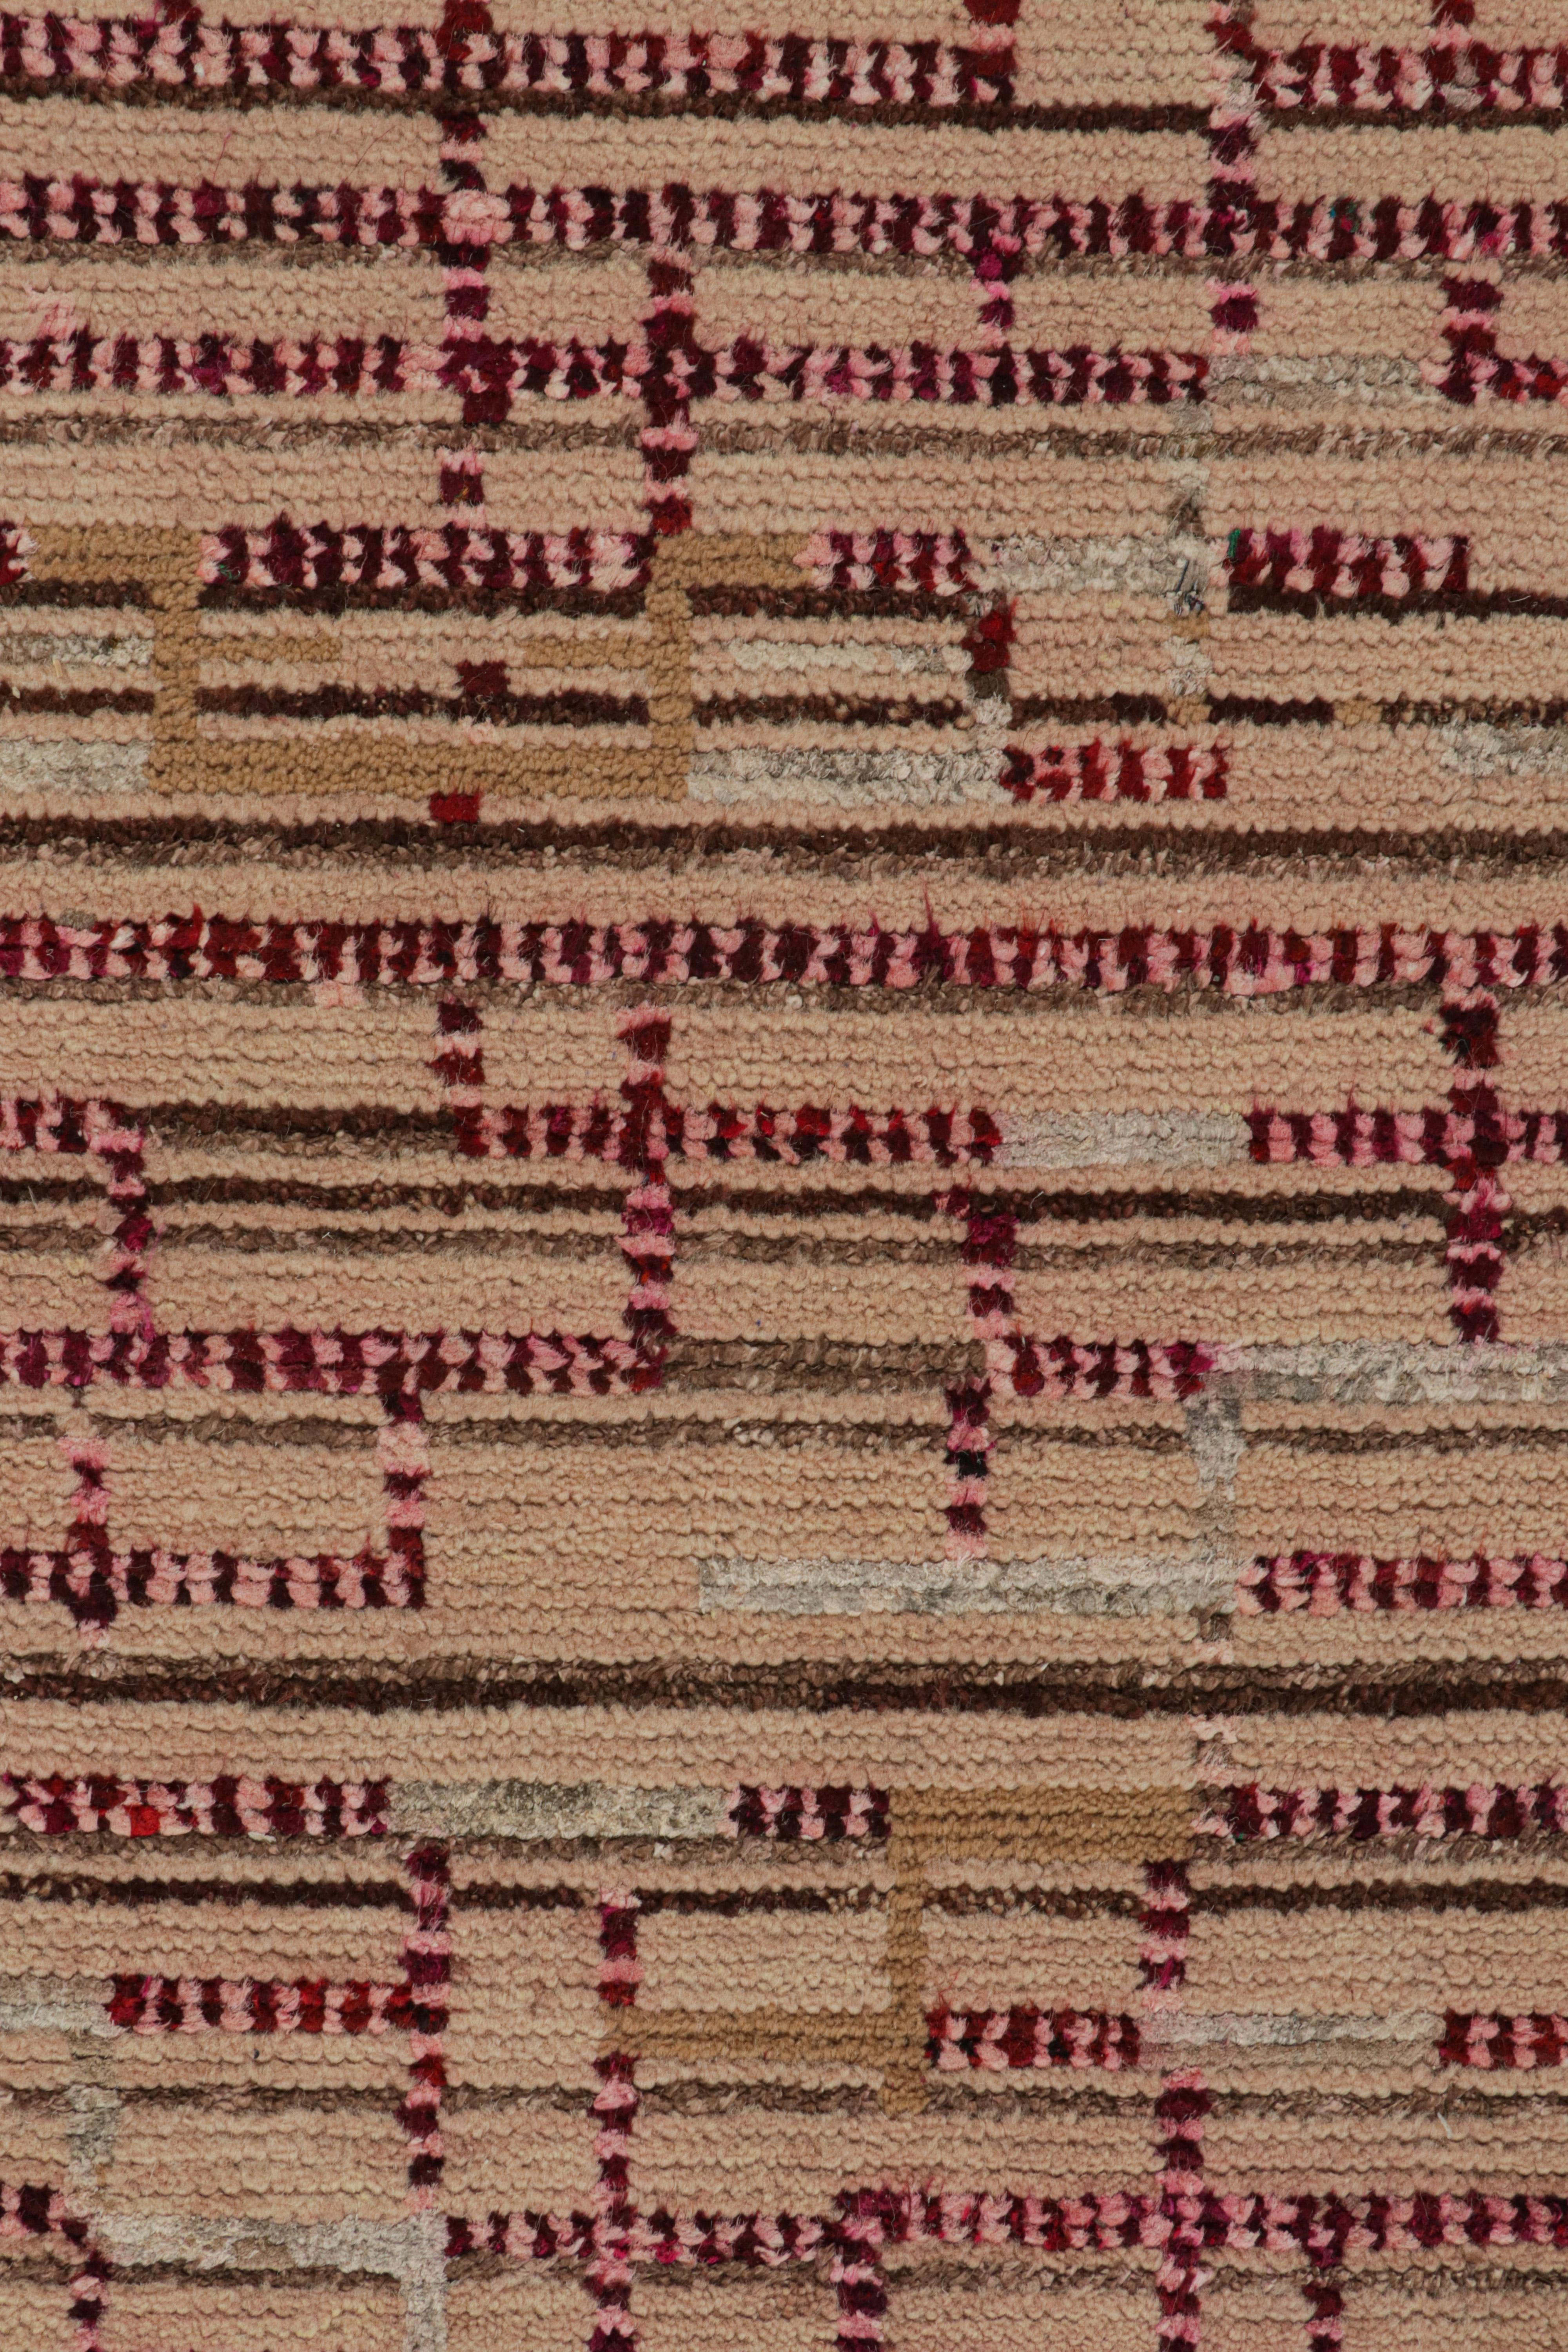 Rug & Kilim’s Moroccan Style Runner in Beige-Brown and Pink Geometric Patterns In New Condition For Sale In Long Island City, NY